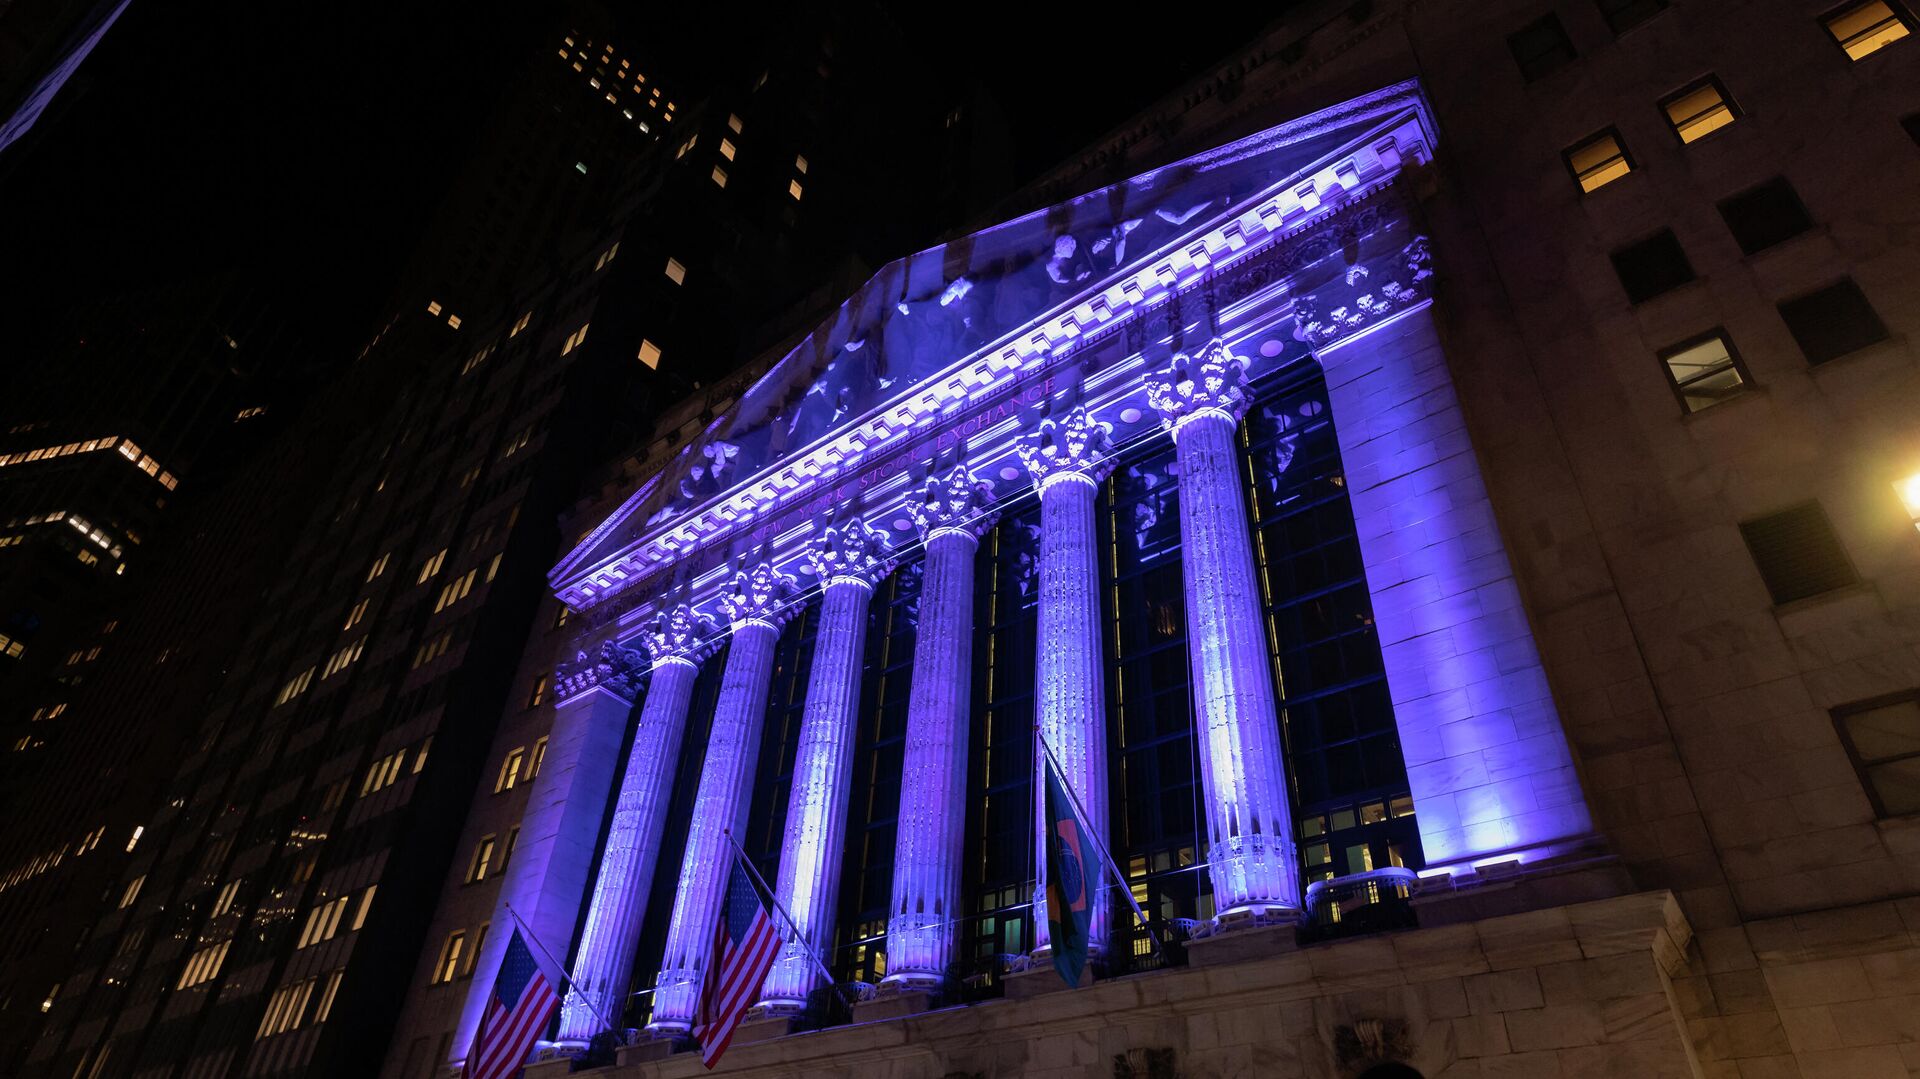 The New York Stock Exchange is lit up in purple to celebrate the launch of the International Paralympic Committee’s WeThe15 campaign on August 19, 2021 in New York City. - Sputnik International, 1920, 09.09.2021